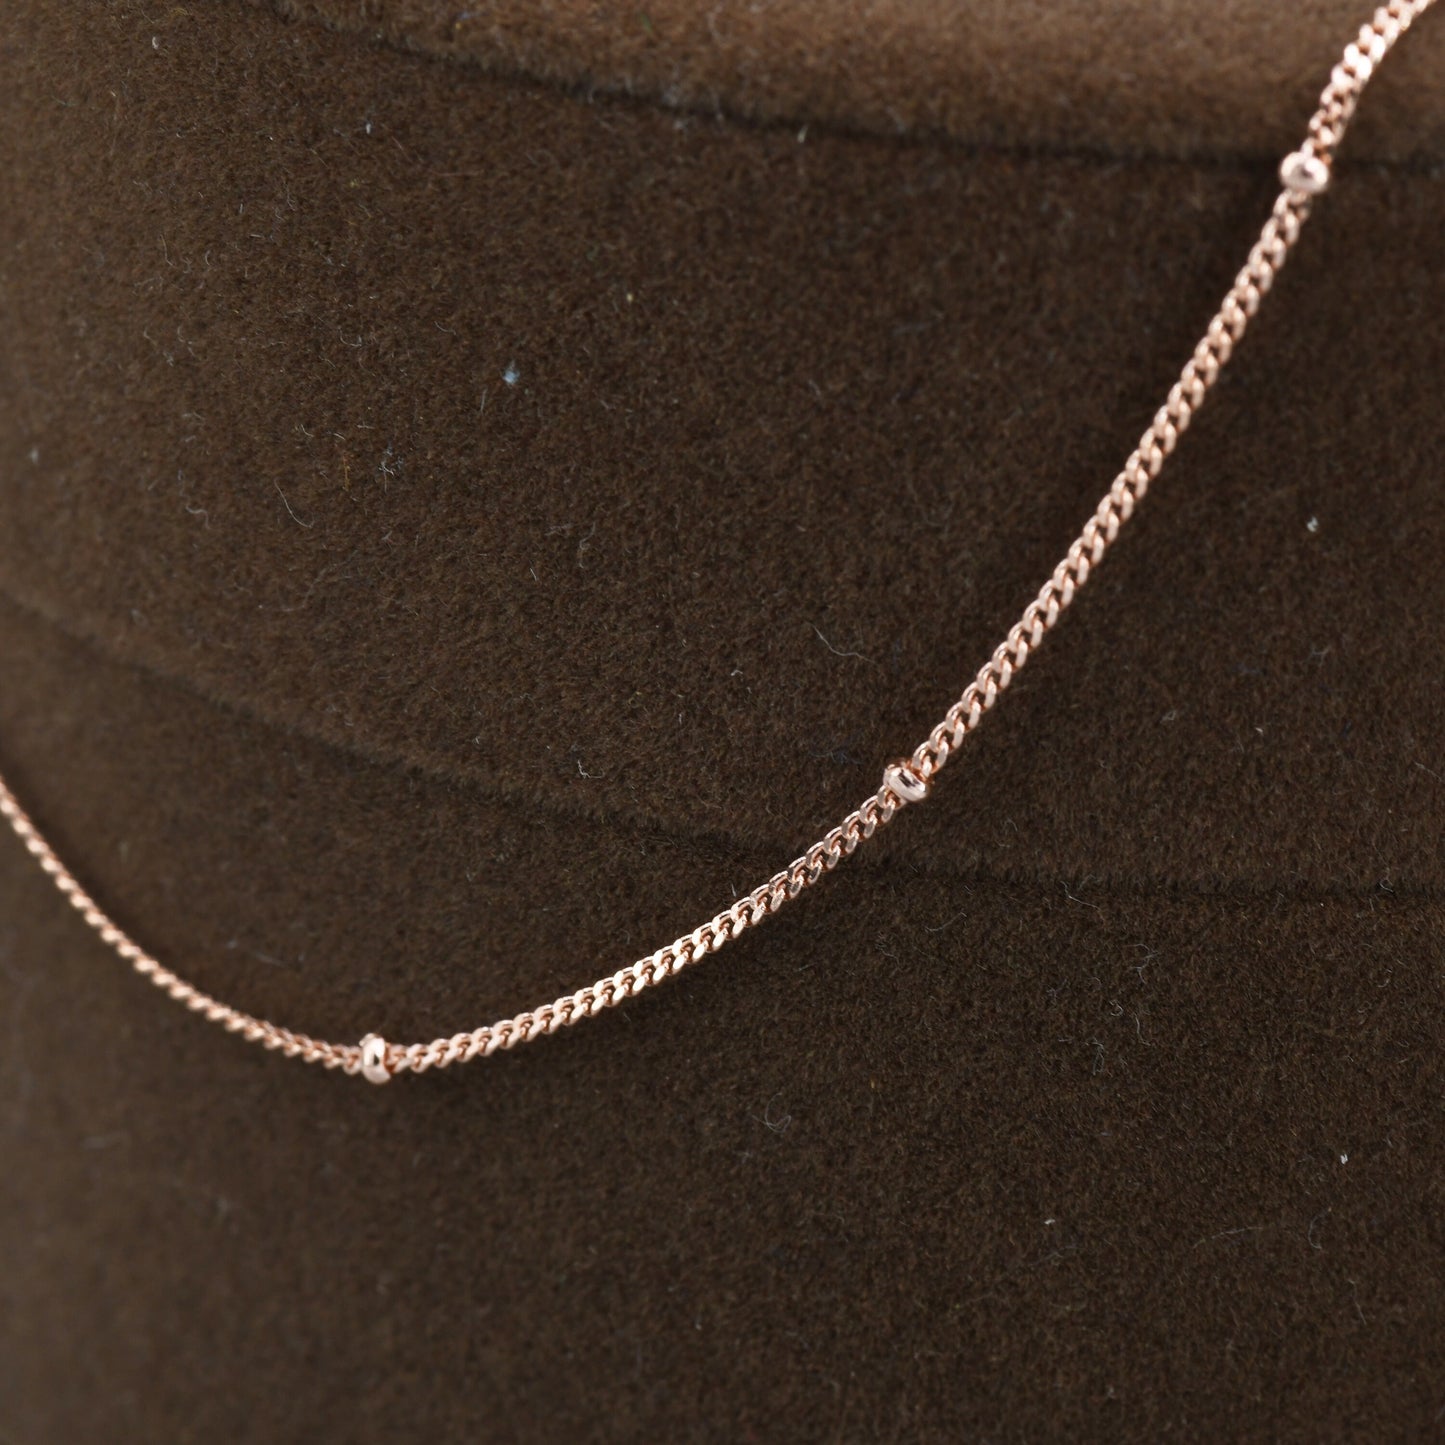 Minimalist Dainty Bead Motif Necklace in Sterling Silver, Various Lengths, Silver or Gold or Rose Gold, Satellite Chain Bead Choker Necklace